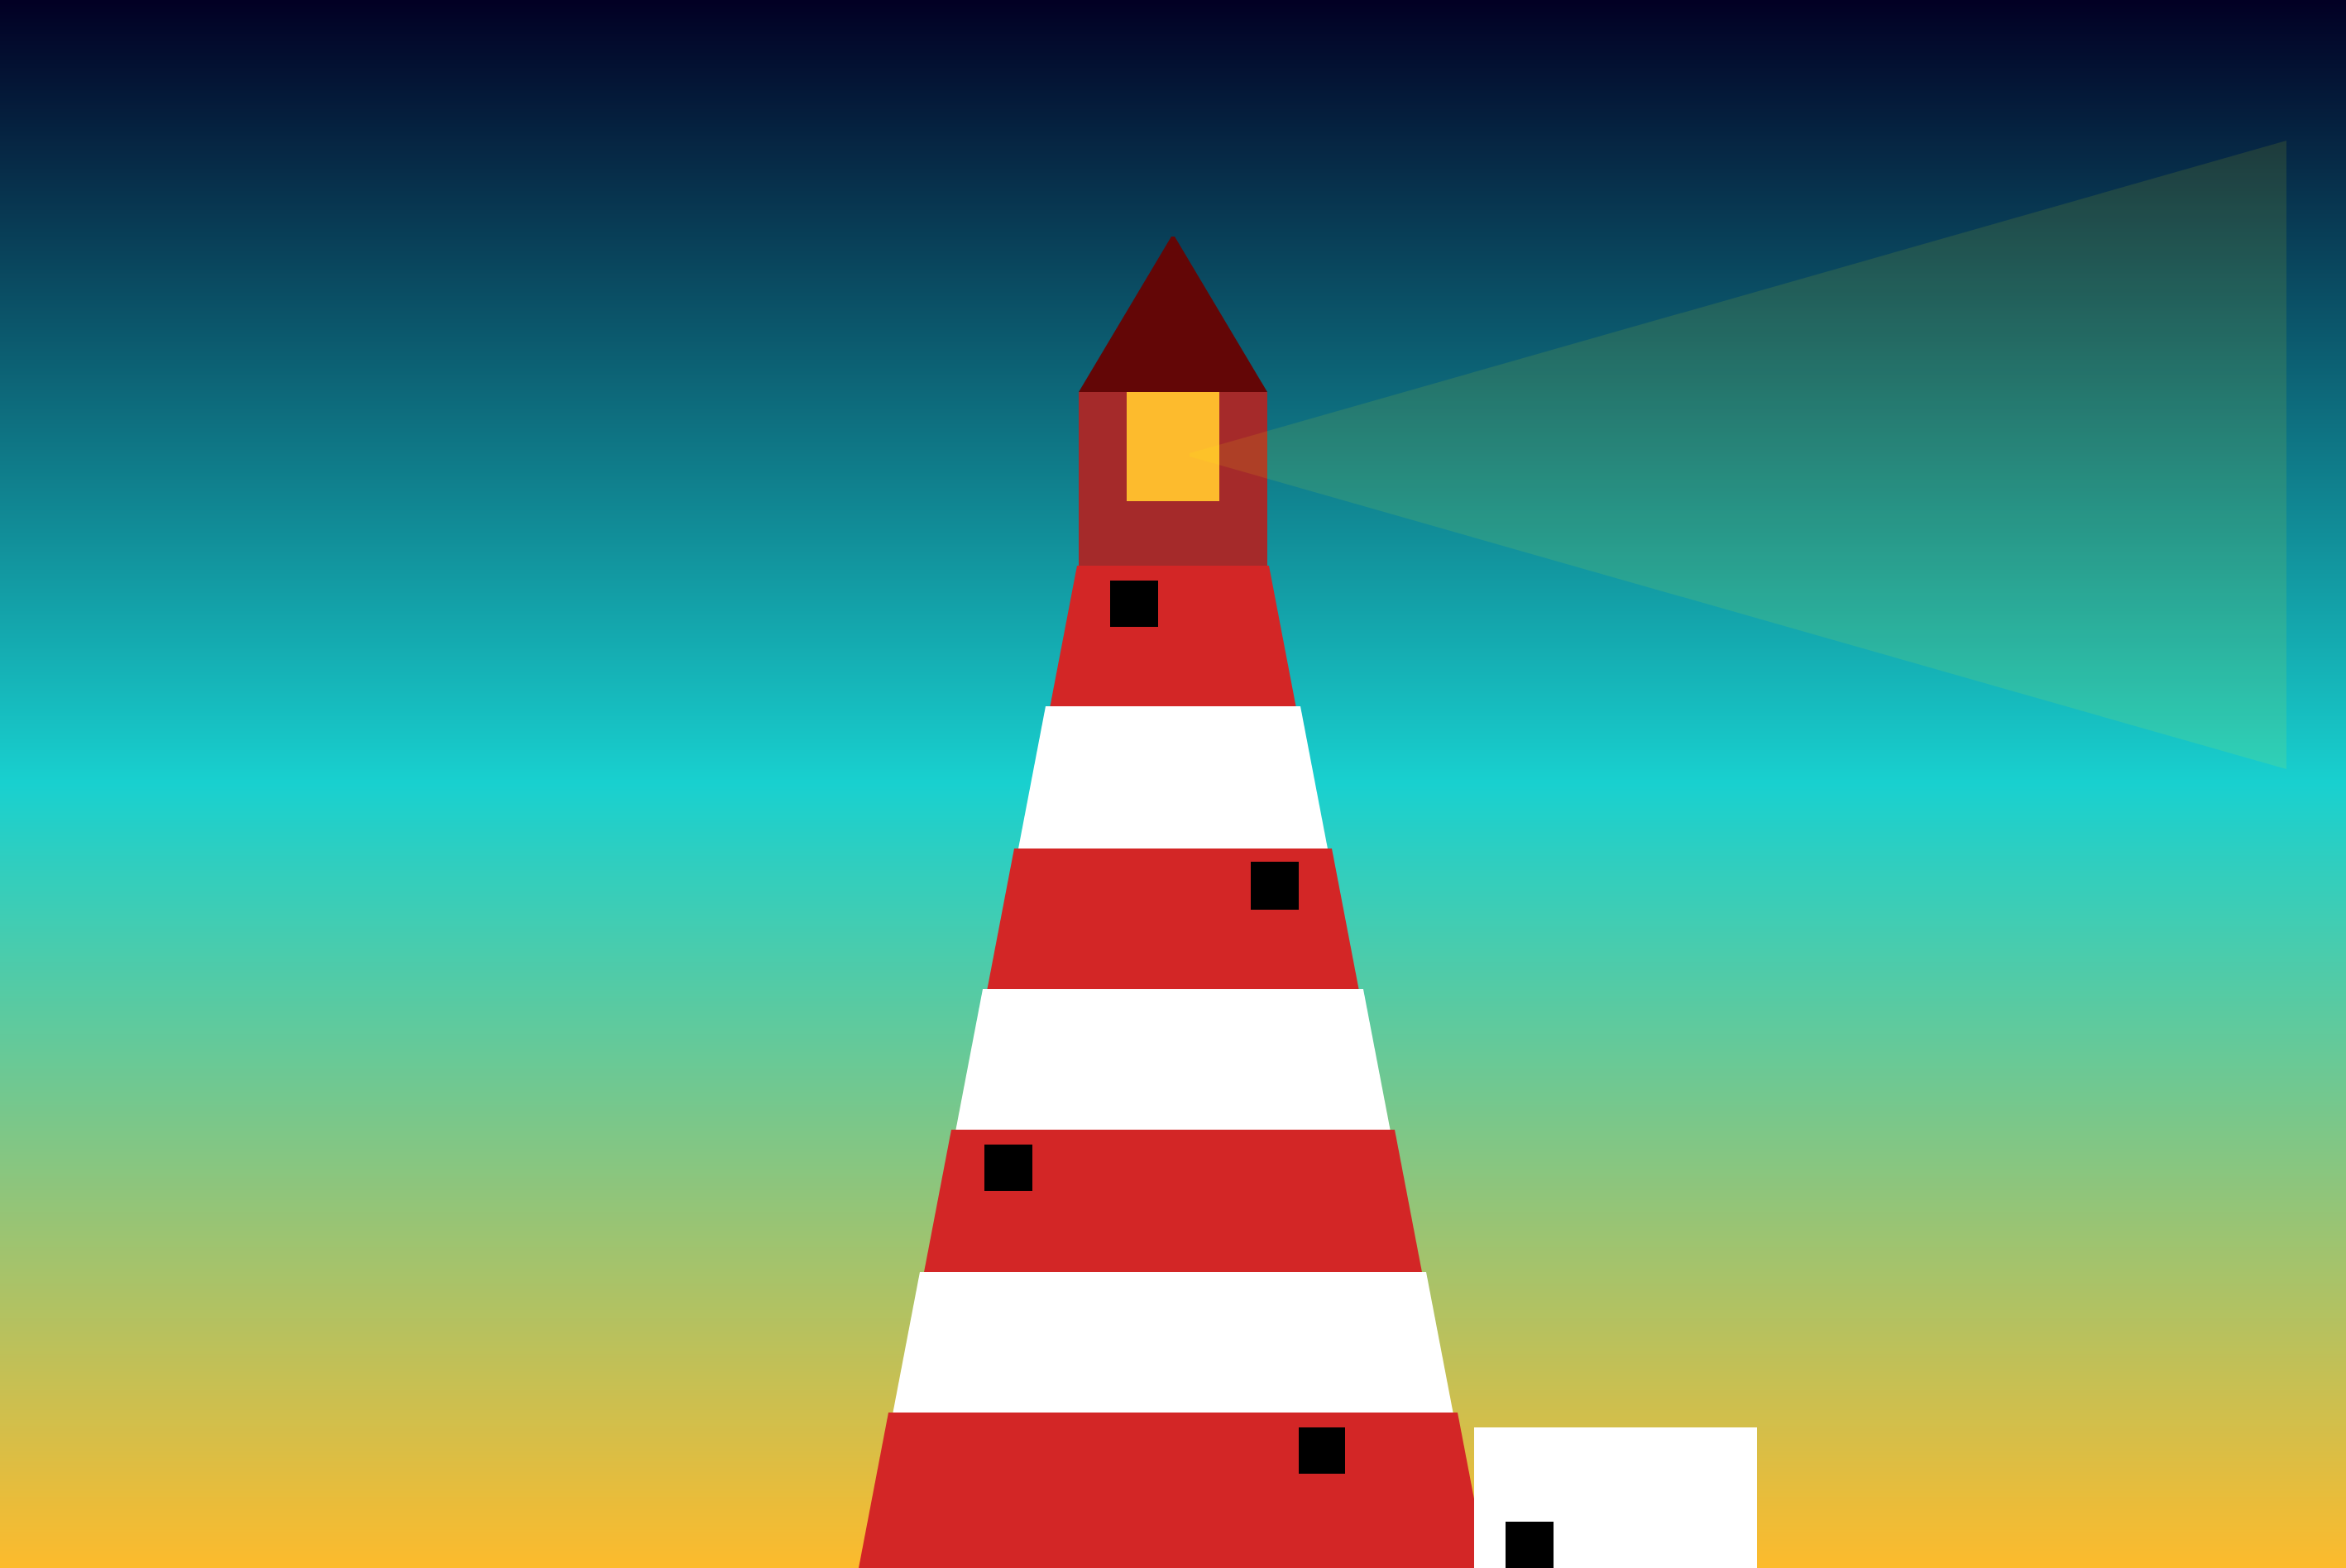 127.0.0.1_5500_lighthouse_index.html (1).png